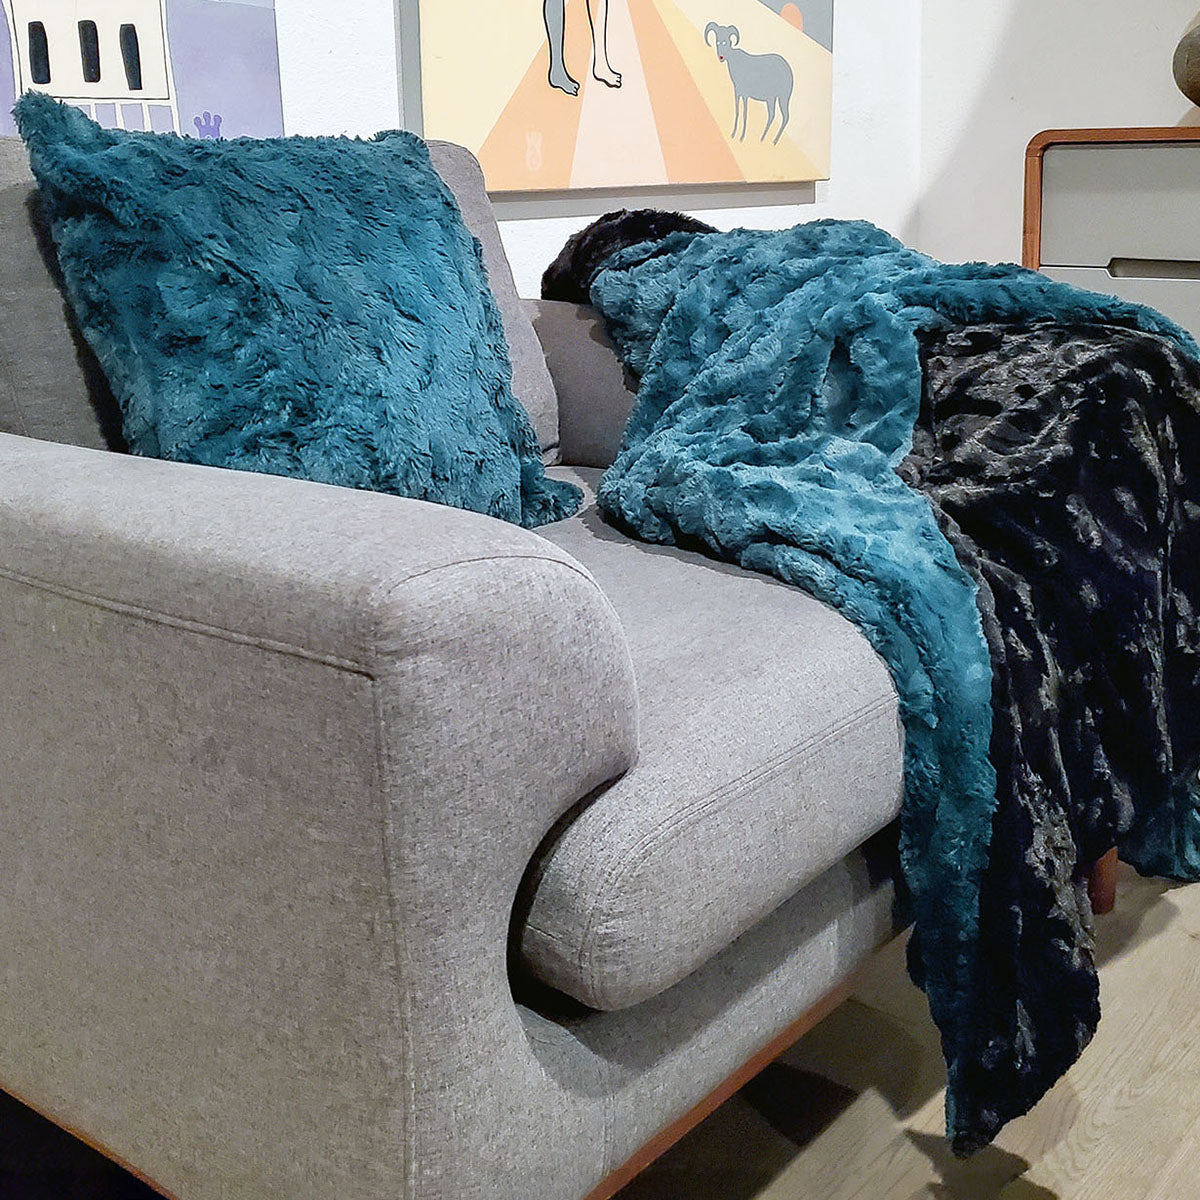 Pillow Shams on couch with matching Throw Blanket in Peacock Pond | Luxury Faux Fur decorative pillow Blue | Handmade by Pandemonium Millinery